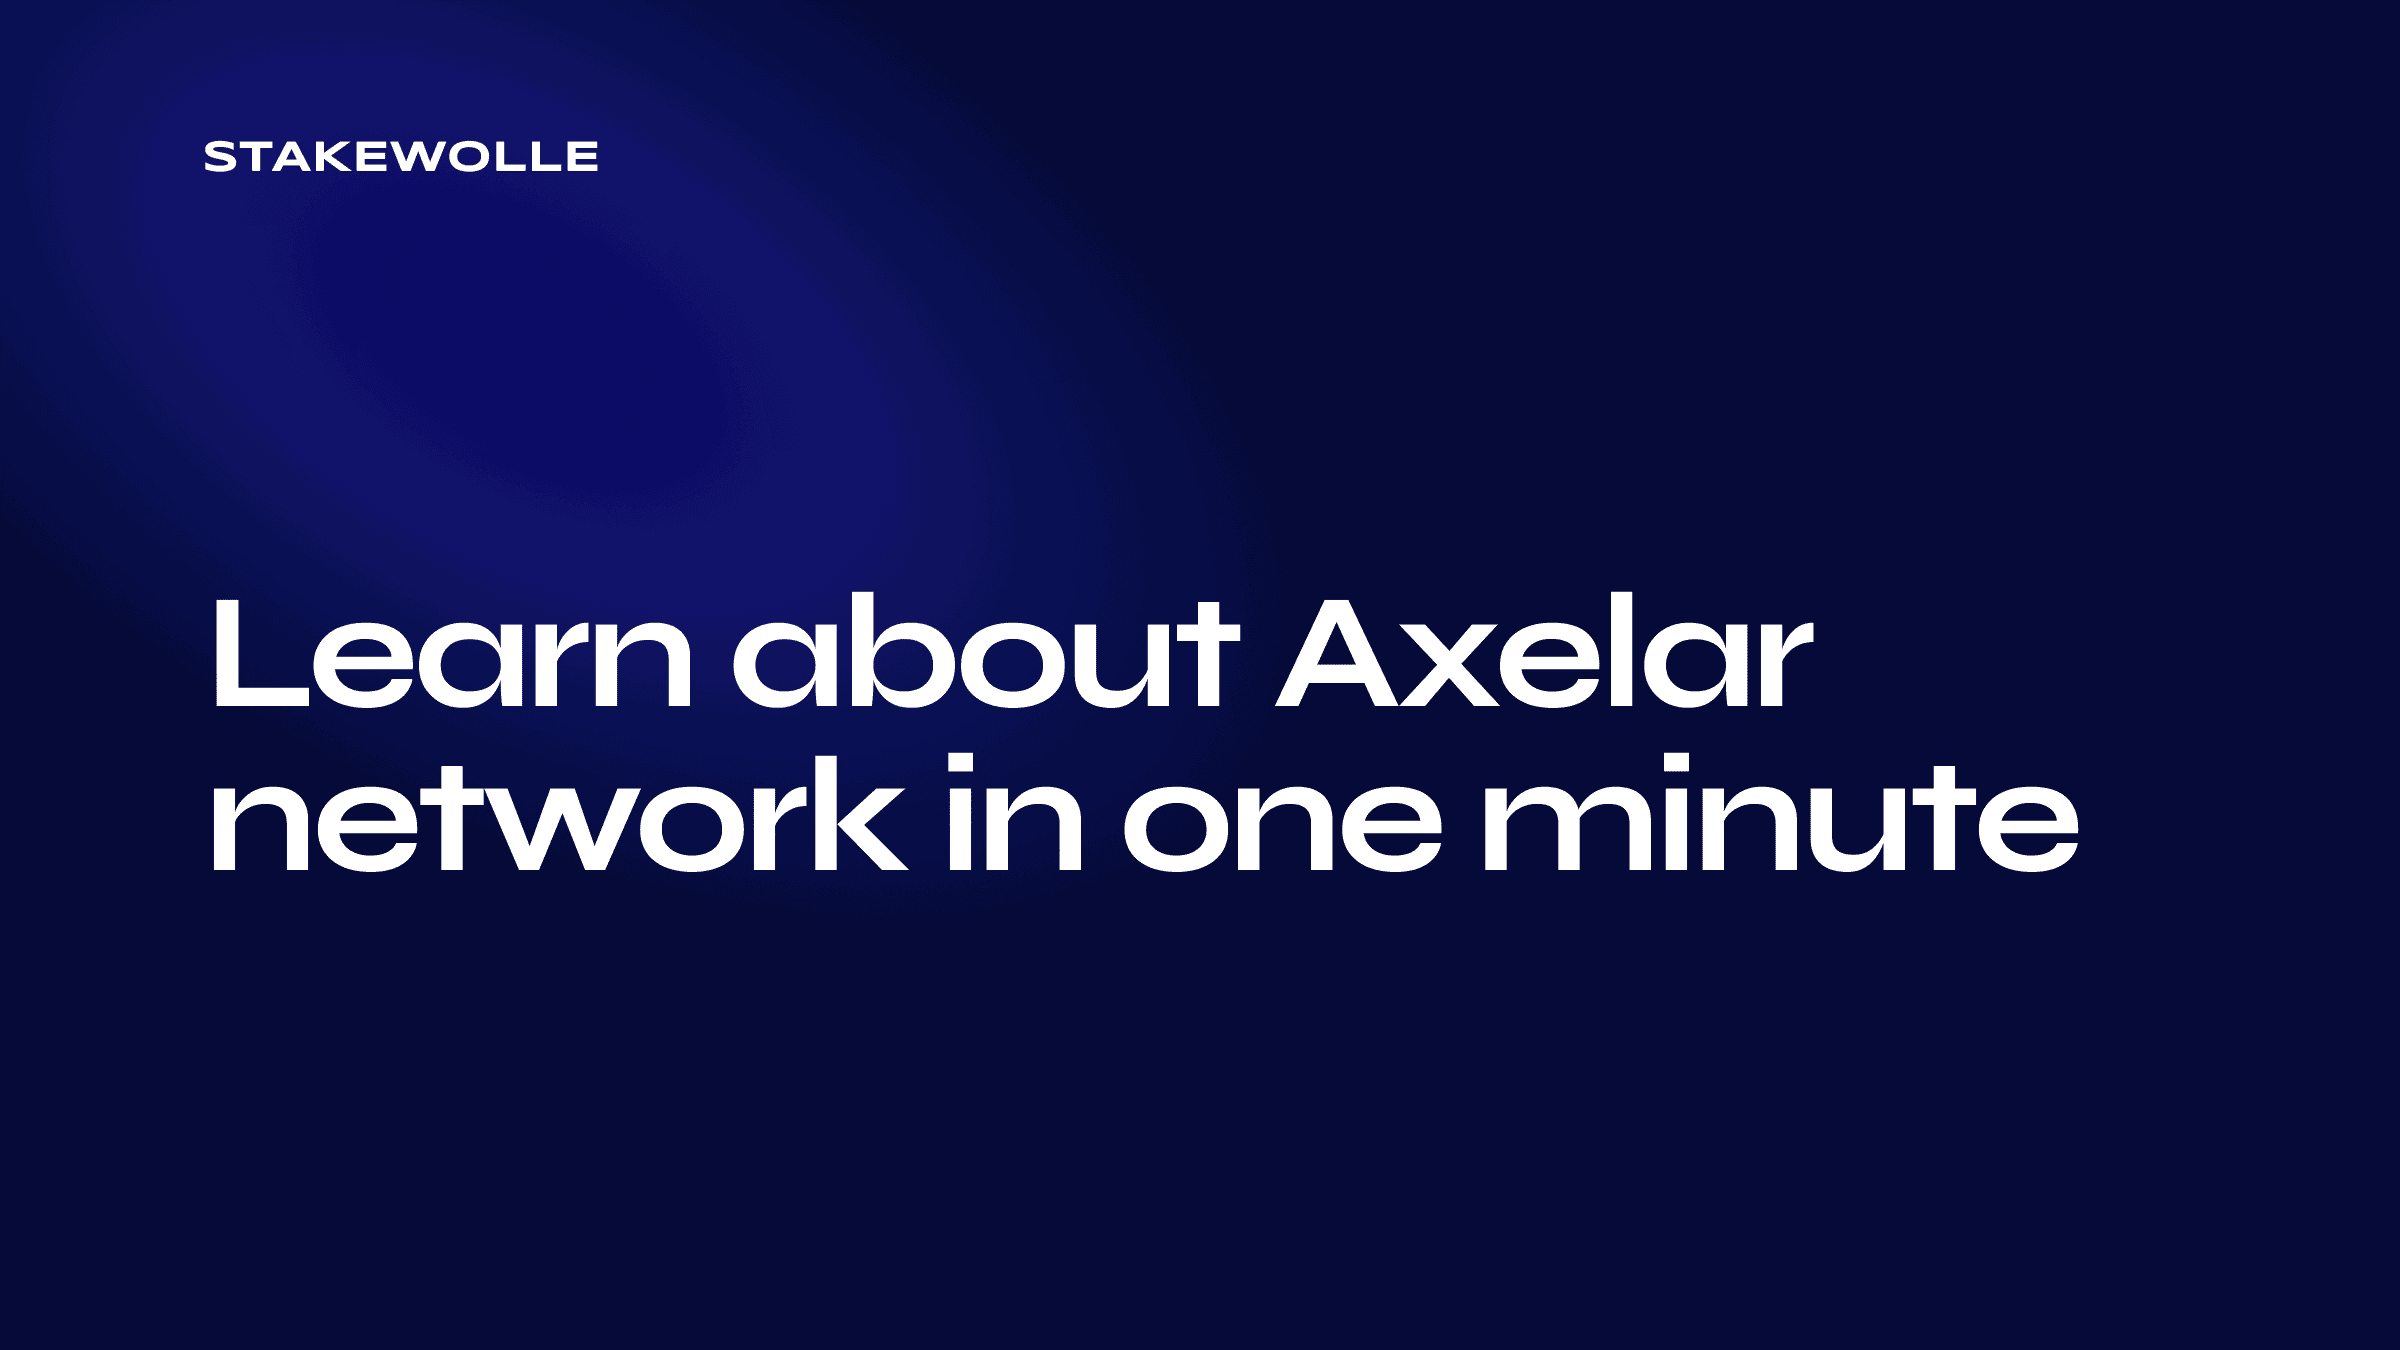 Learn about Axelar network in one minute